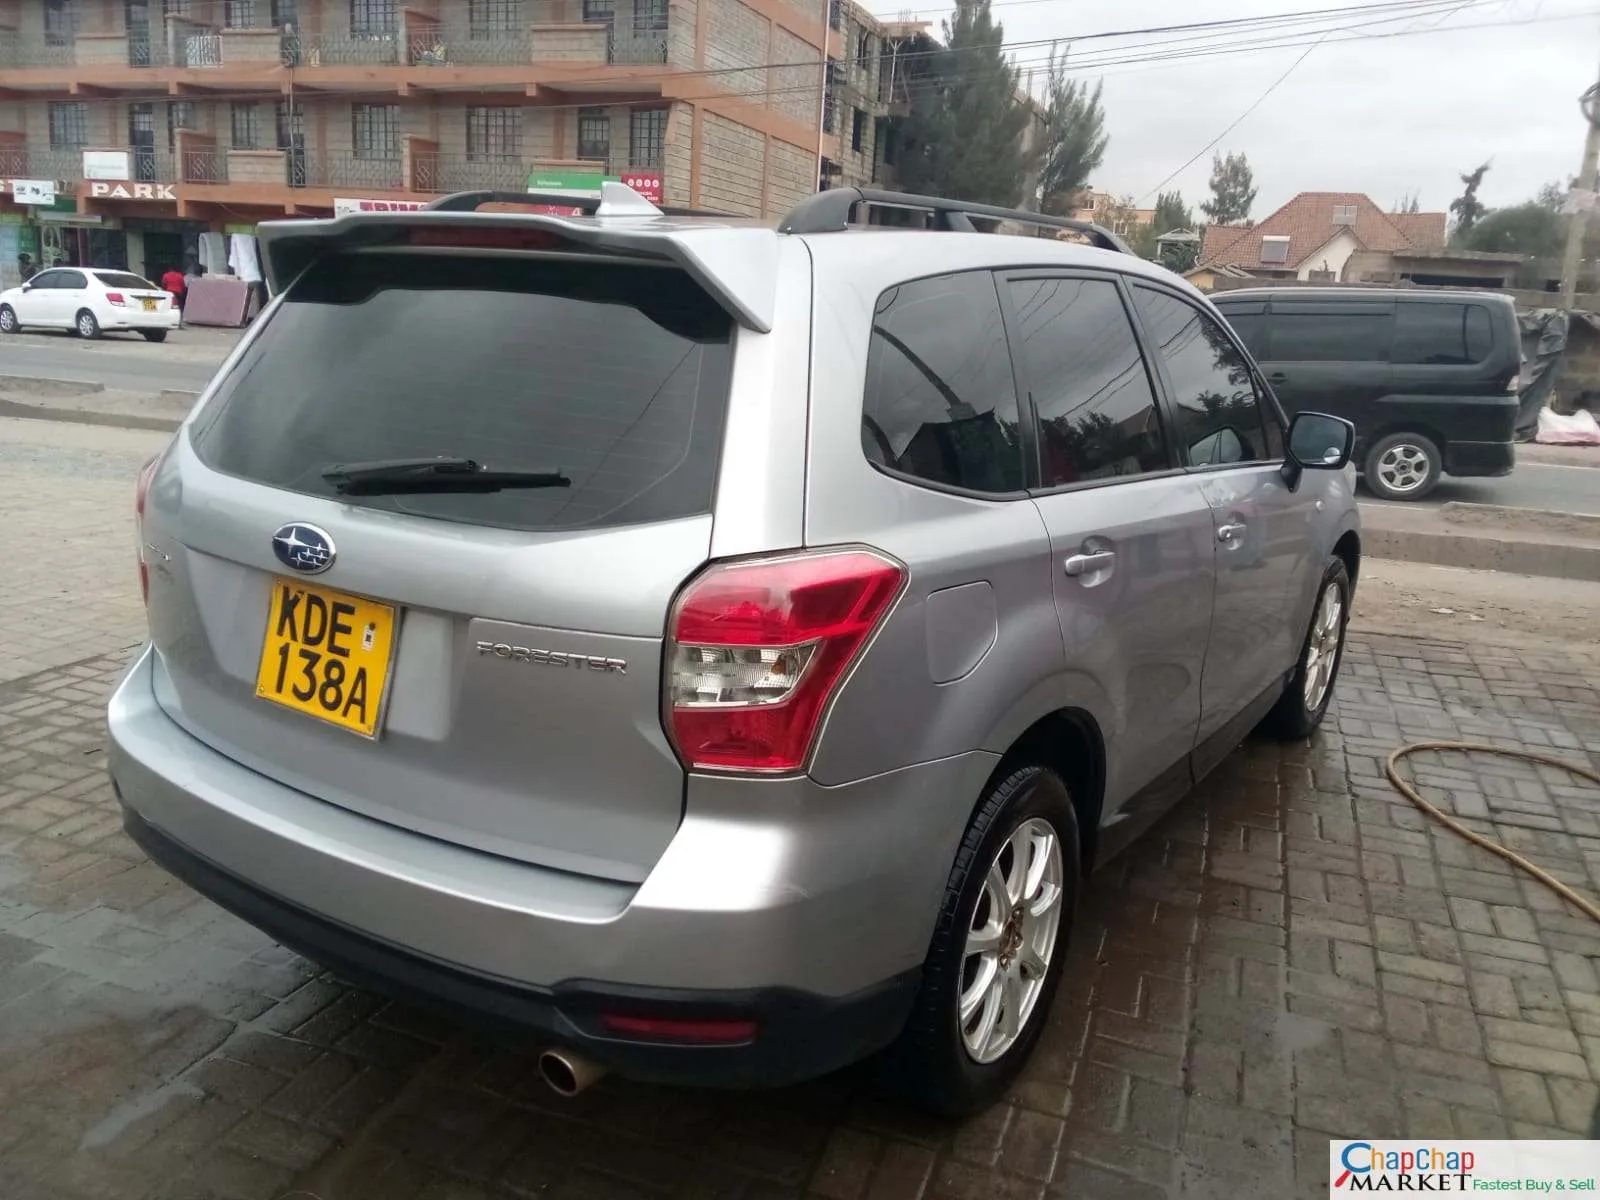 Subaru Forester for sale in Kenya You Pay 30% deposit Trade in Ok EXCLUSIVE Hire Purchase Installments (SOLD)